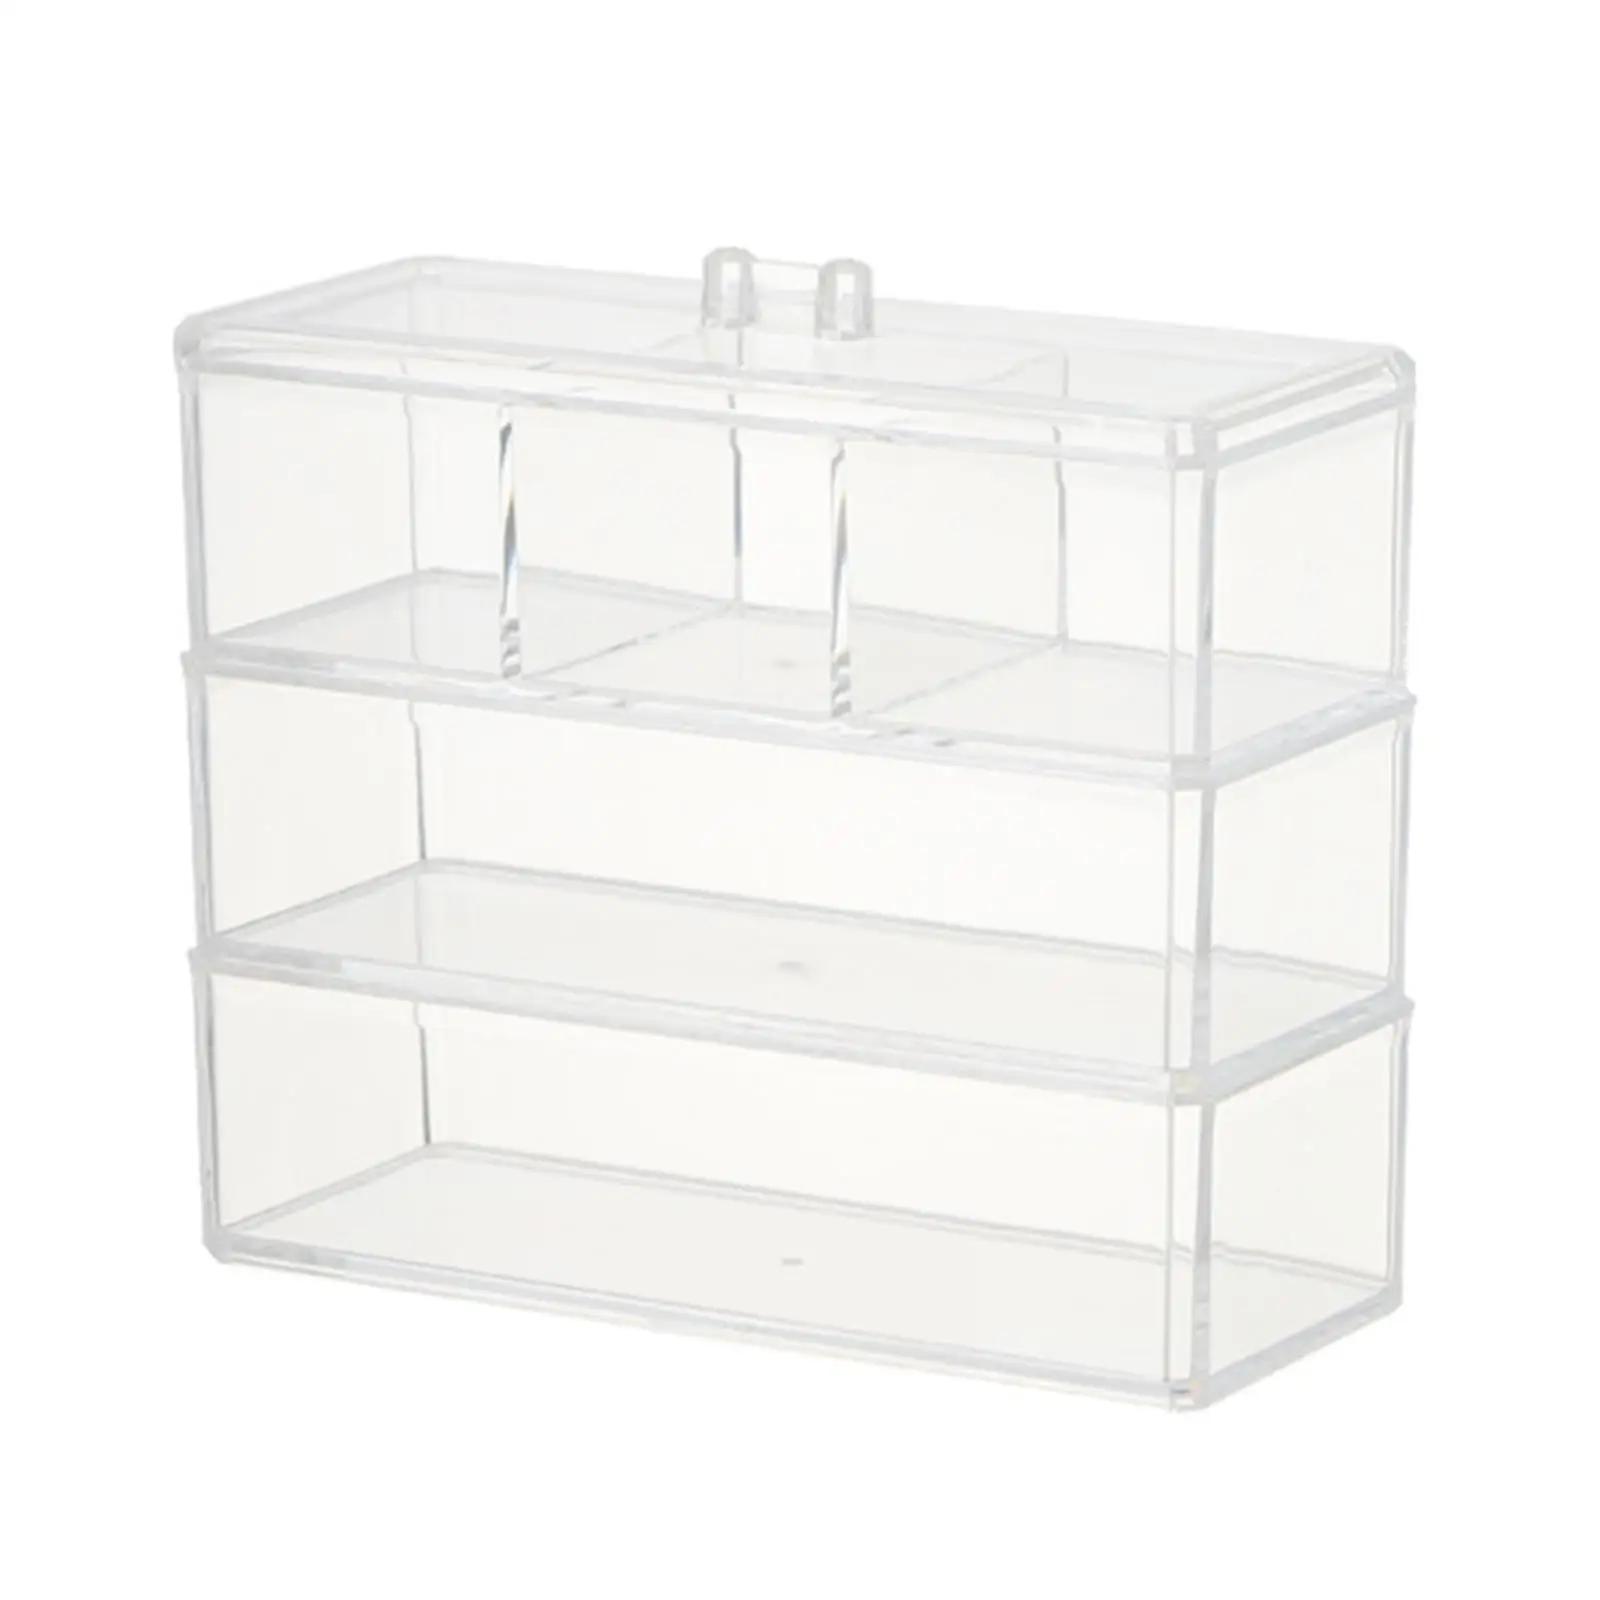 Desk Organizer Storage Box Office Stackable Acrylic Jewelry Cabinet Portable